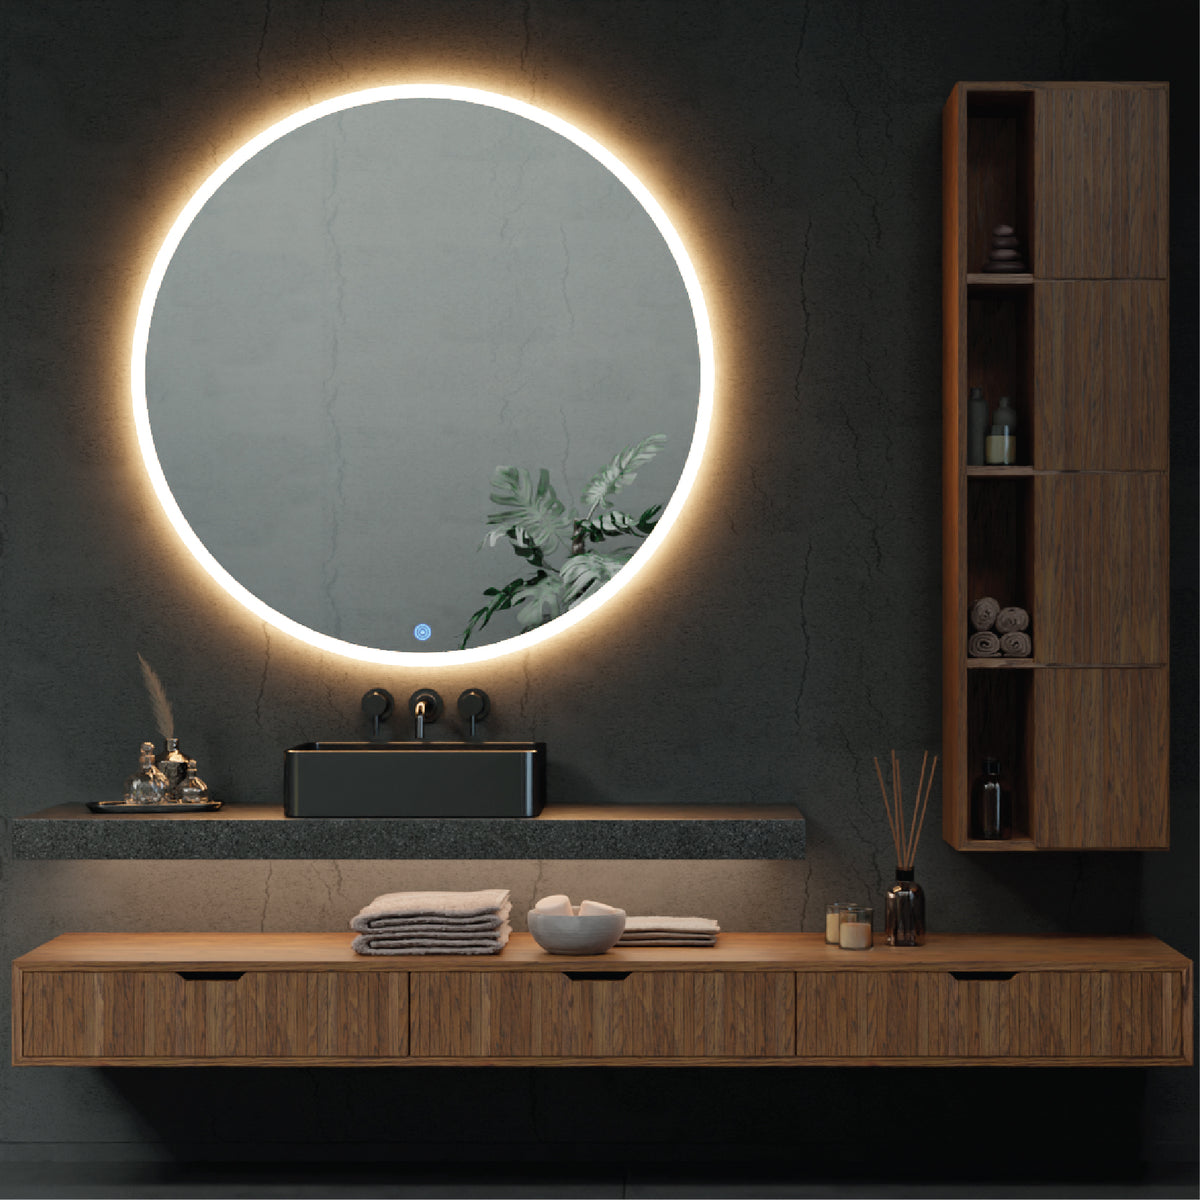 Titan LED Mirror: a modern touch with versatile plug-in or hardwire options for easy installation.